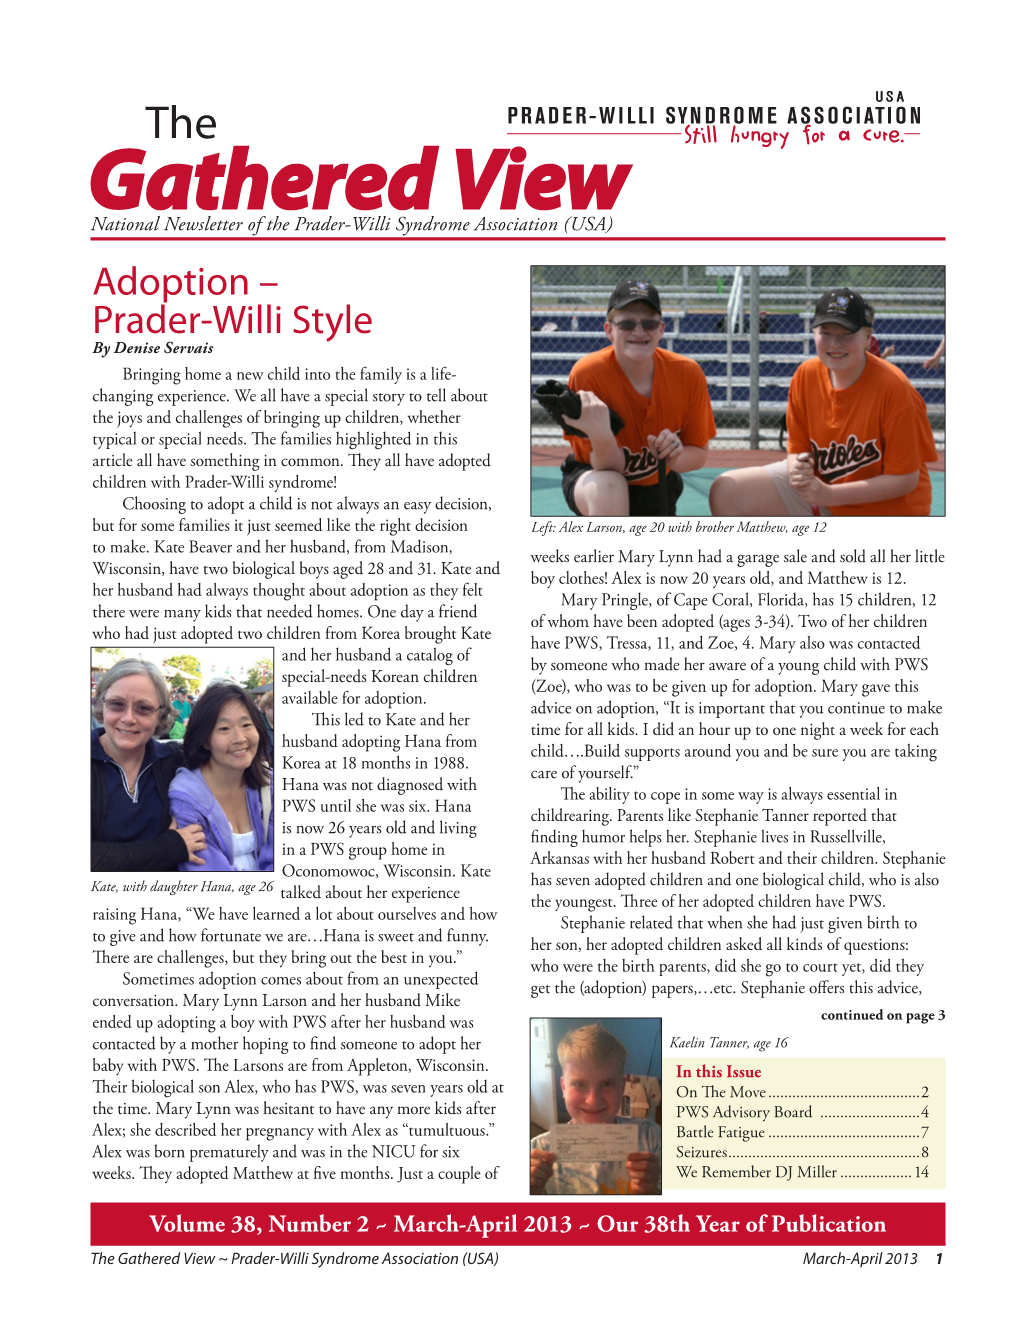 April 2013 ~ Our 38Th Year of Publication the Gathered View ~ Prader-Willi Syndrome Association (USA) March-April 2013 1 Fundraising